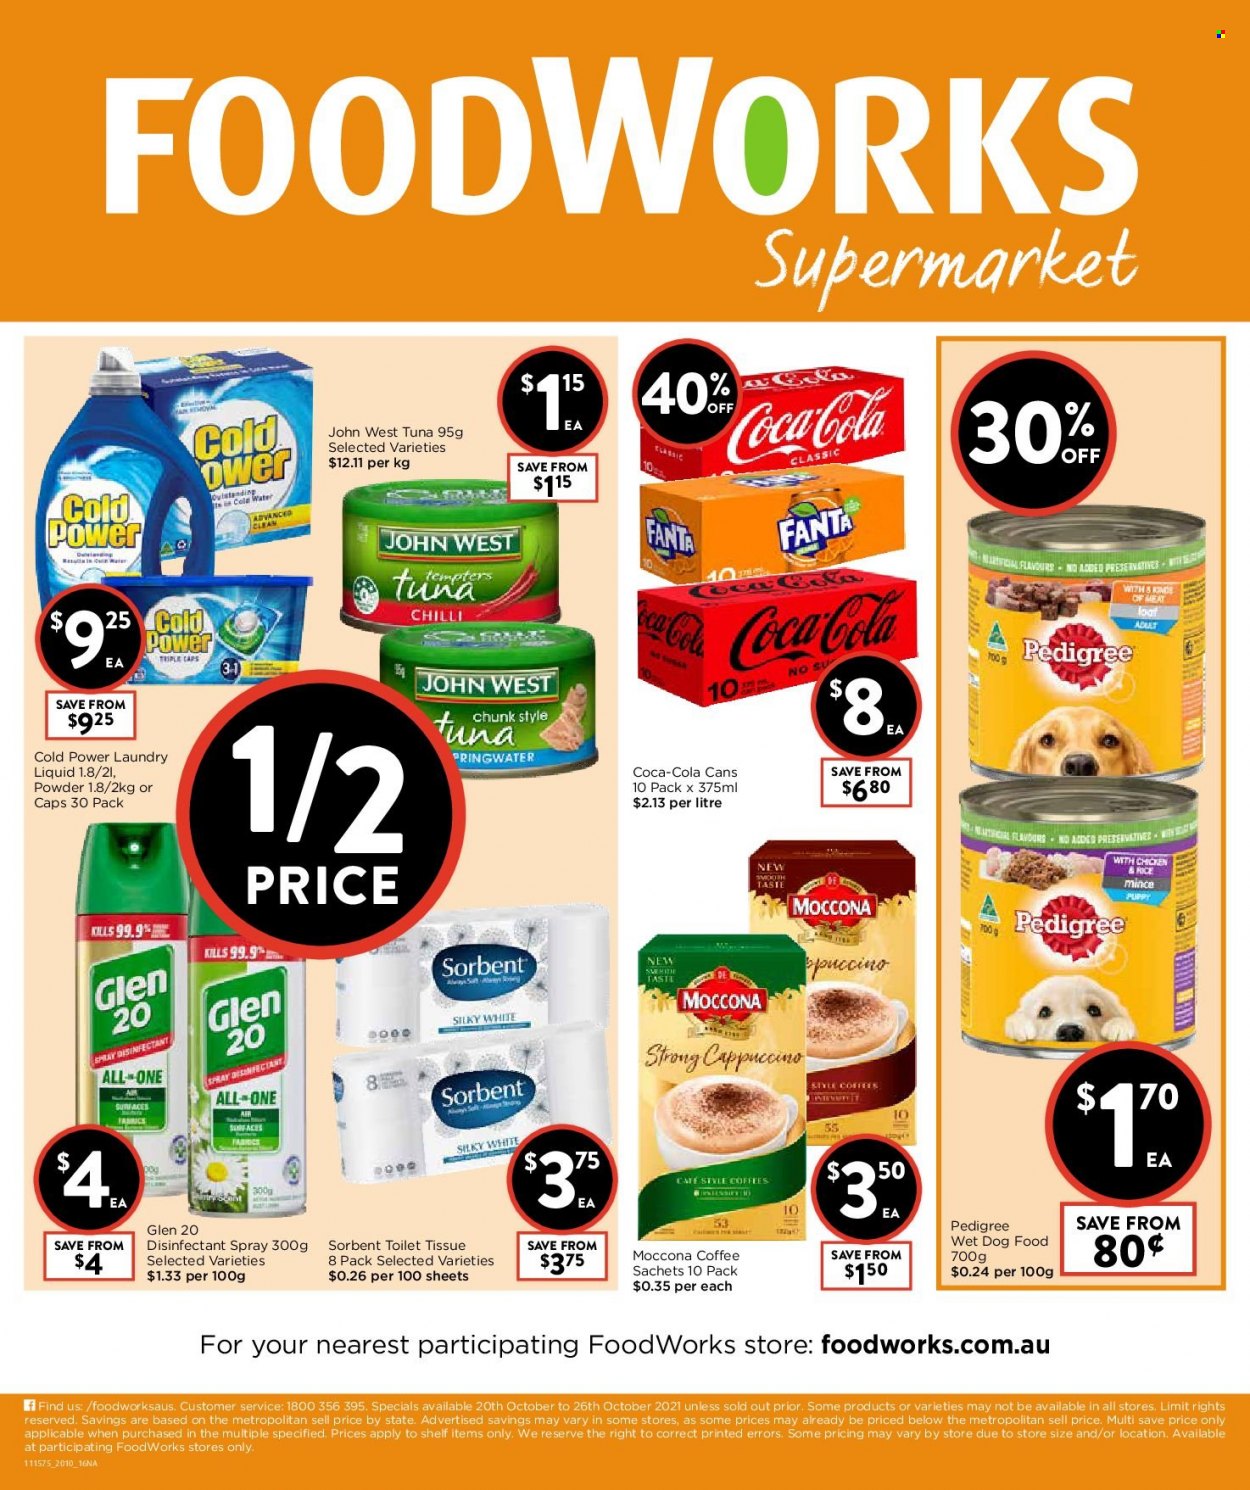 Foodworks catalogue - 20.10.2021 - 26.10.2021.